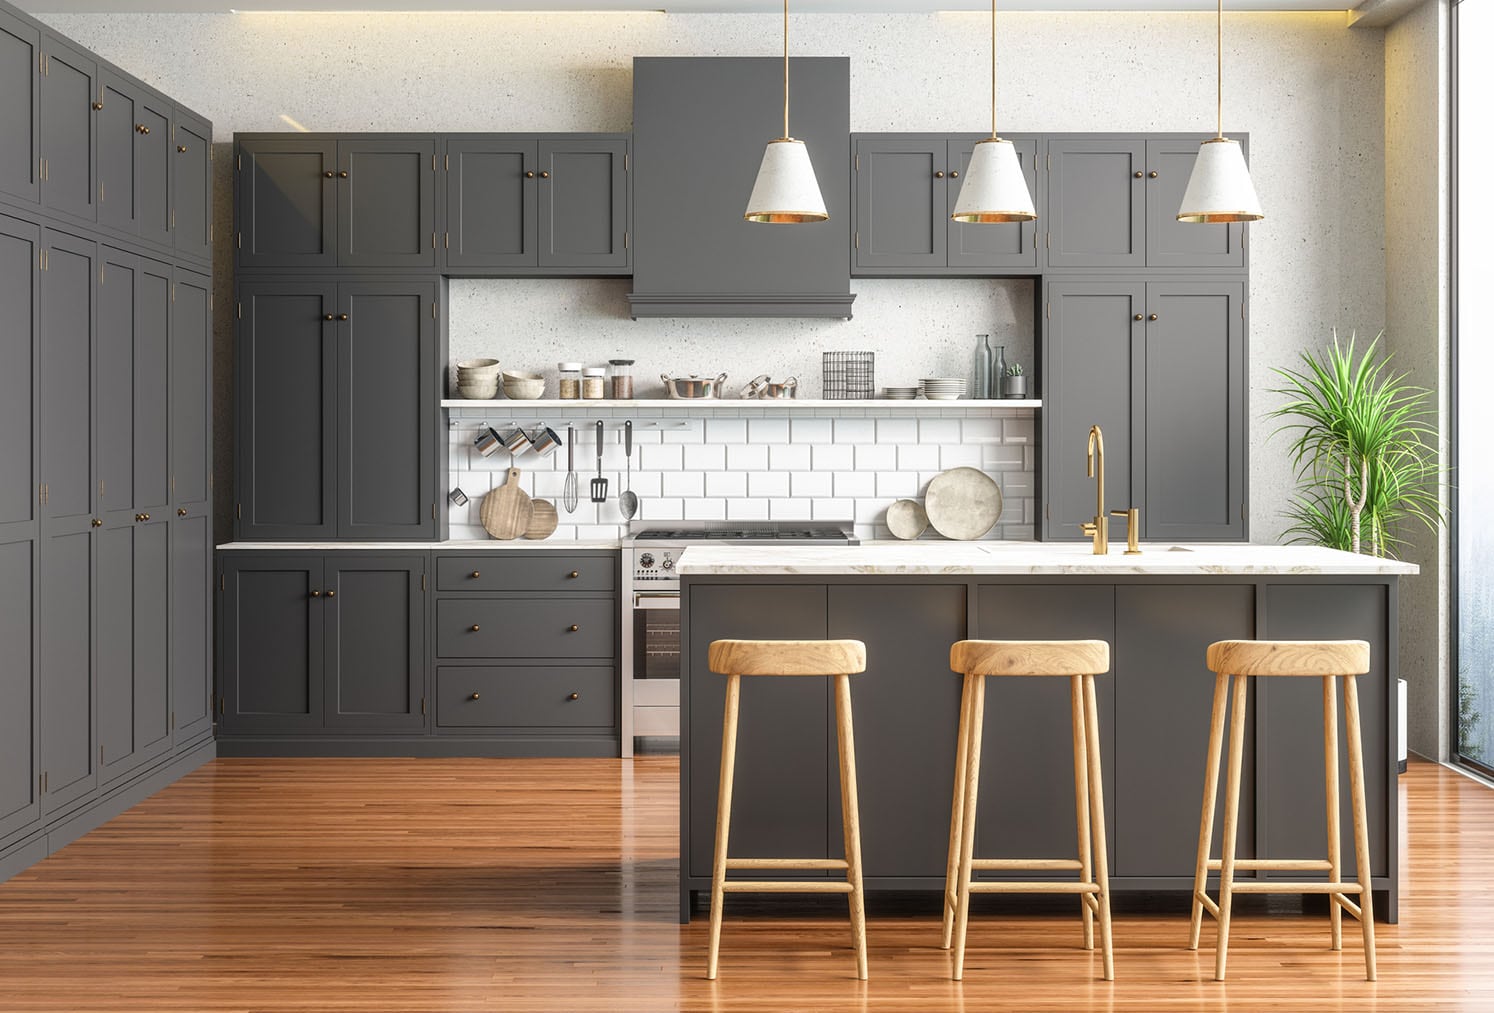 Modern kitchen with grey cabinets and door hardware